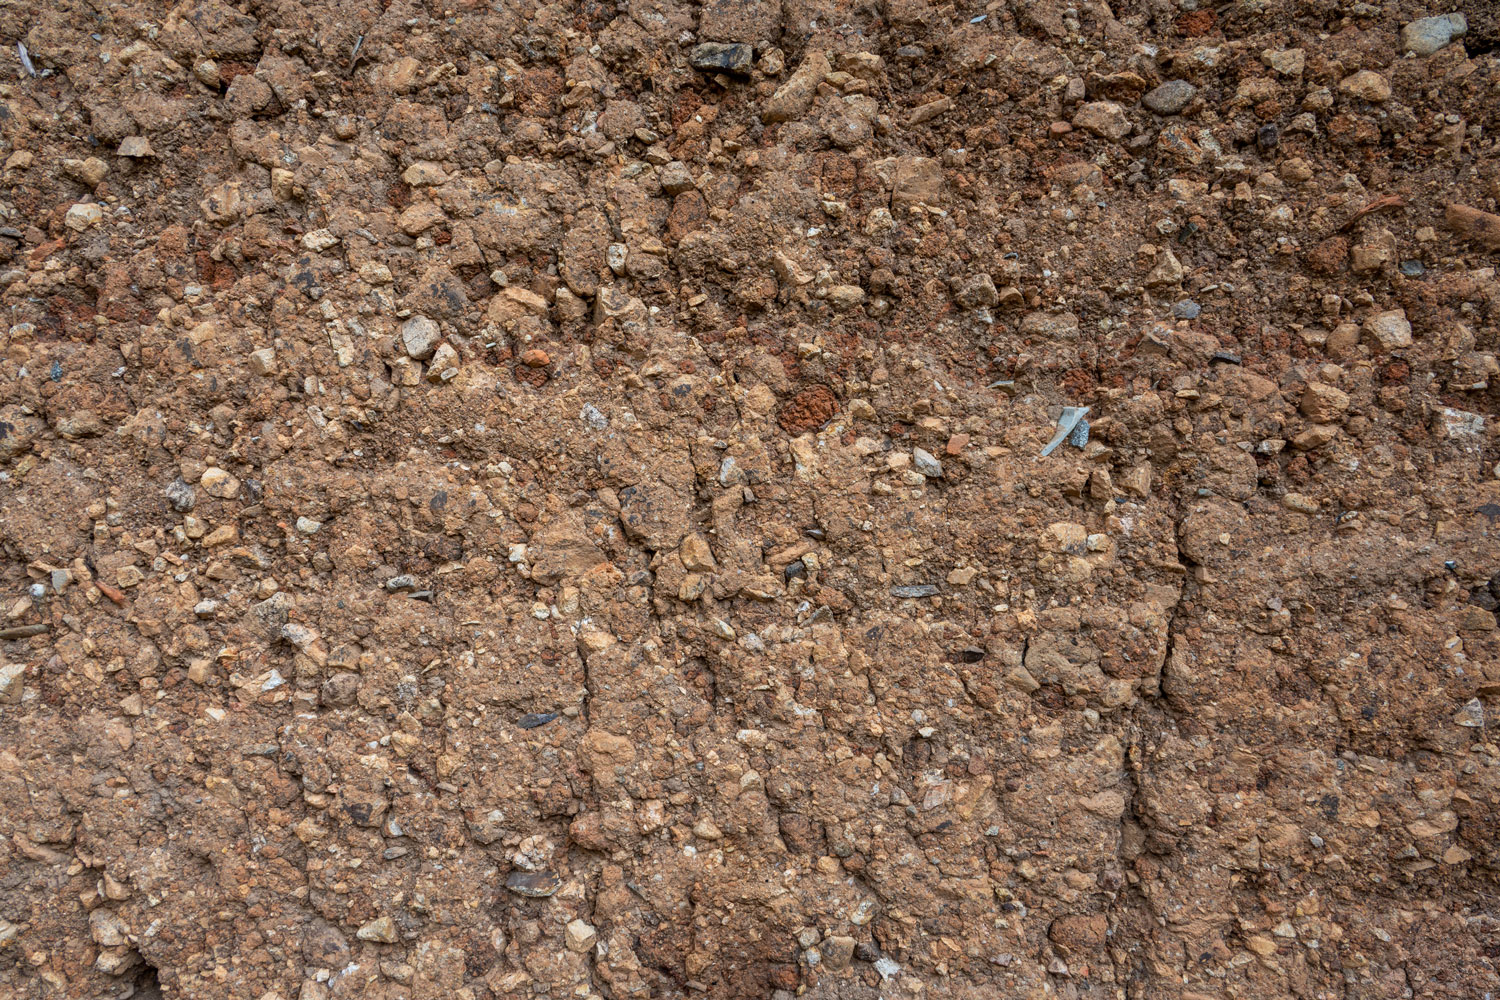 Clay soil with lots of rocks